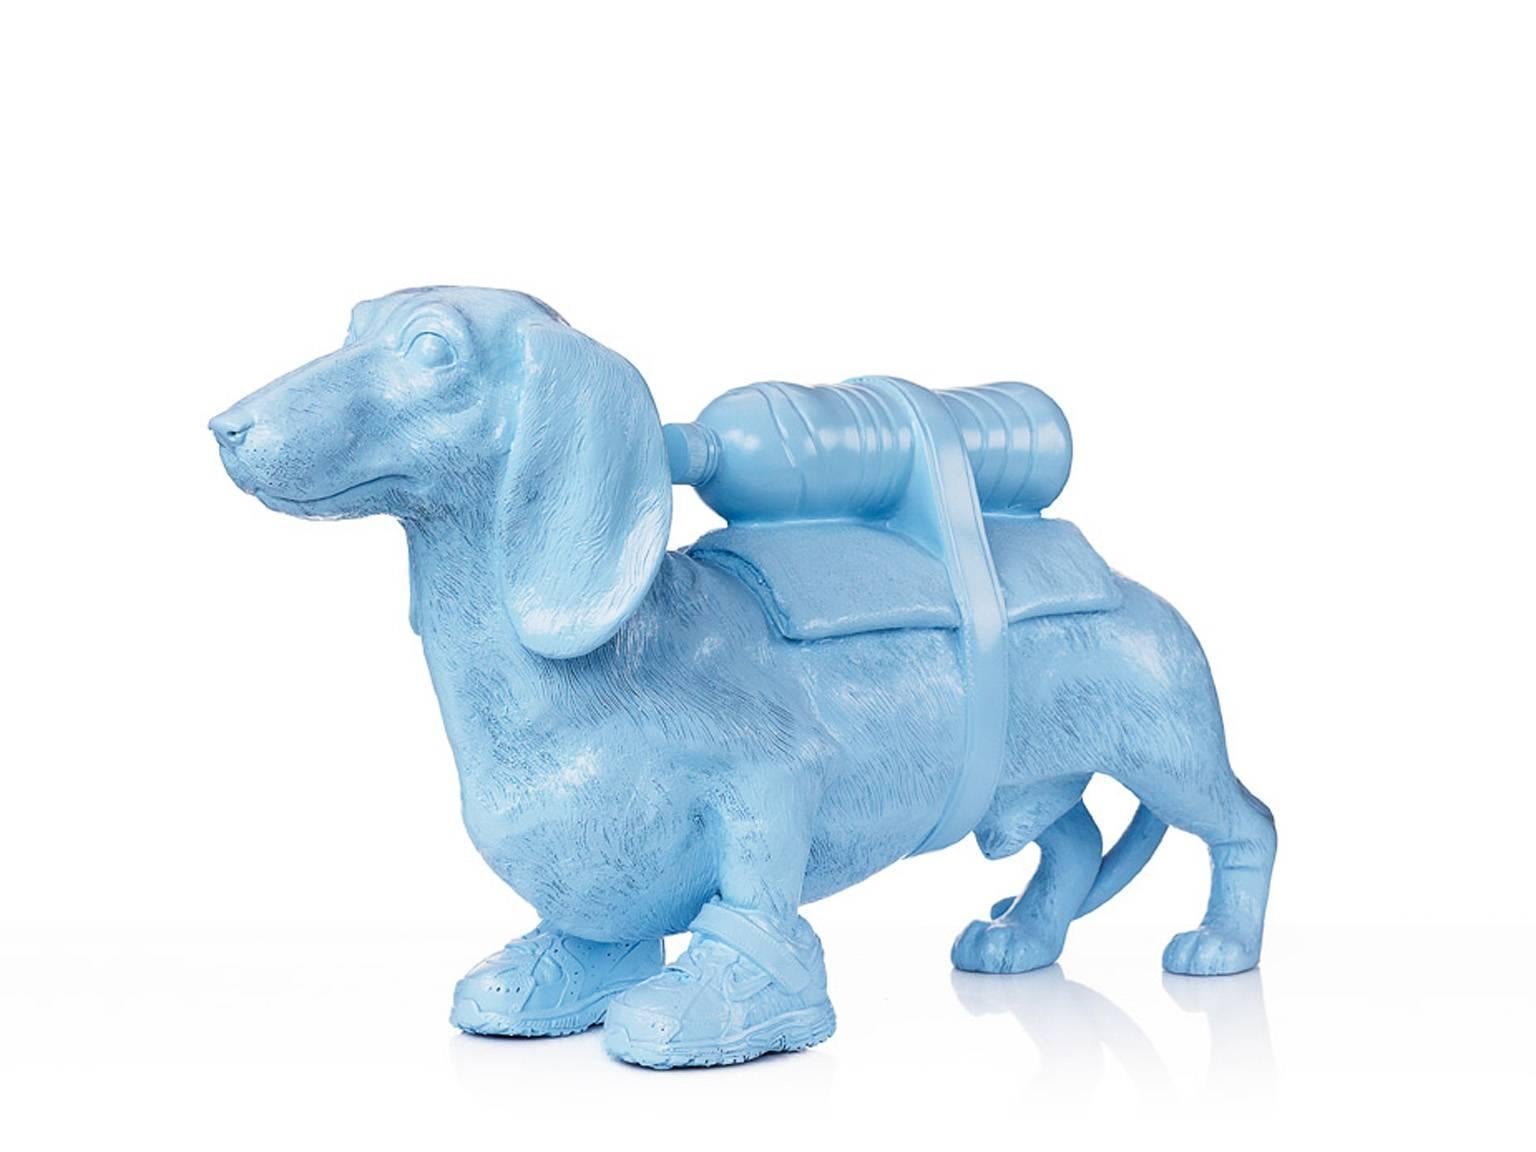 William Sweetlove Figurative Sculpture - Cloned Dachshund with pet bottle. 